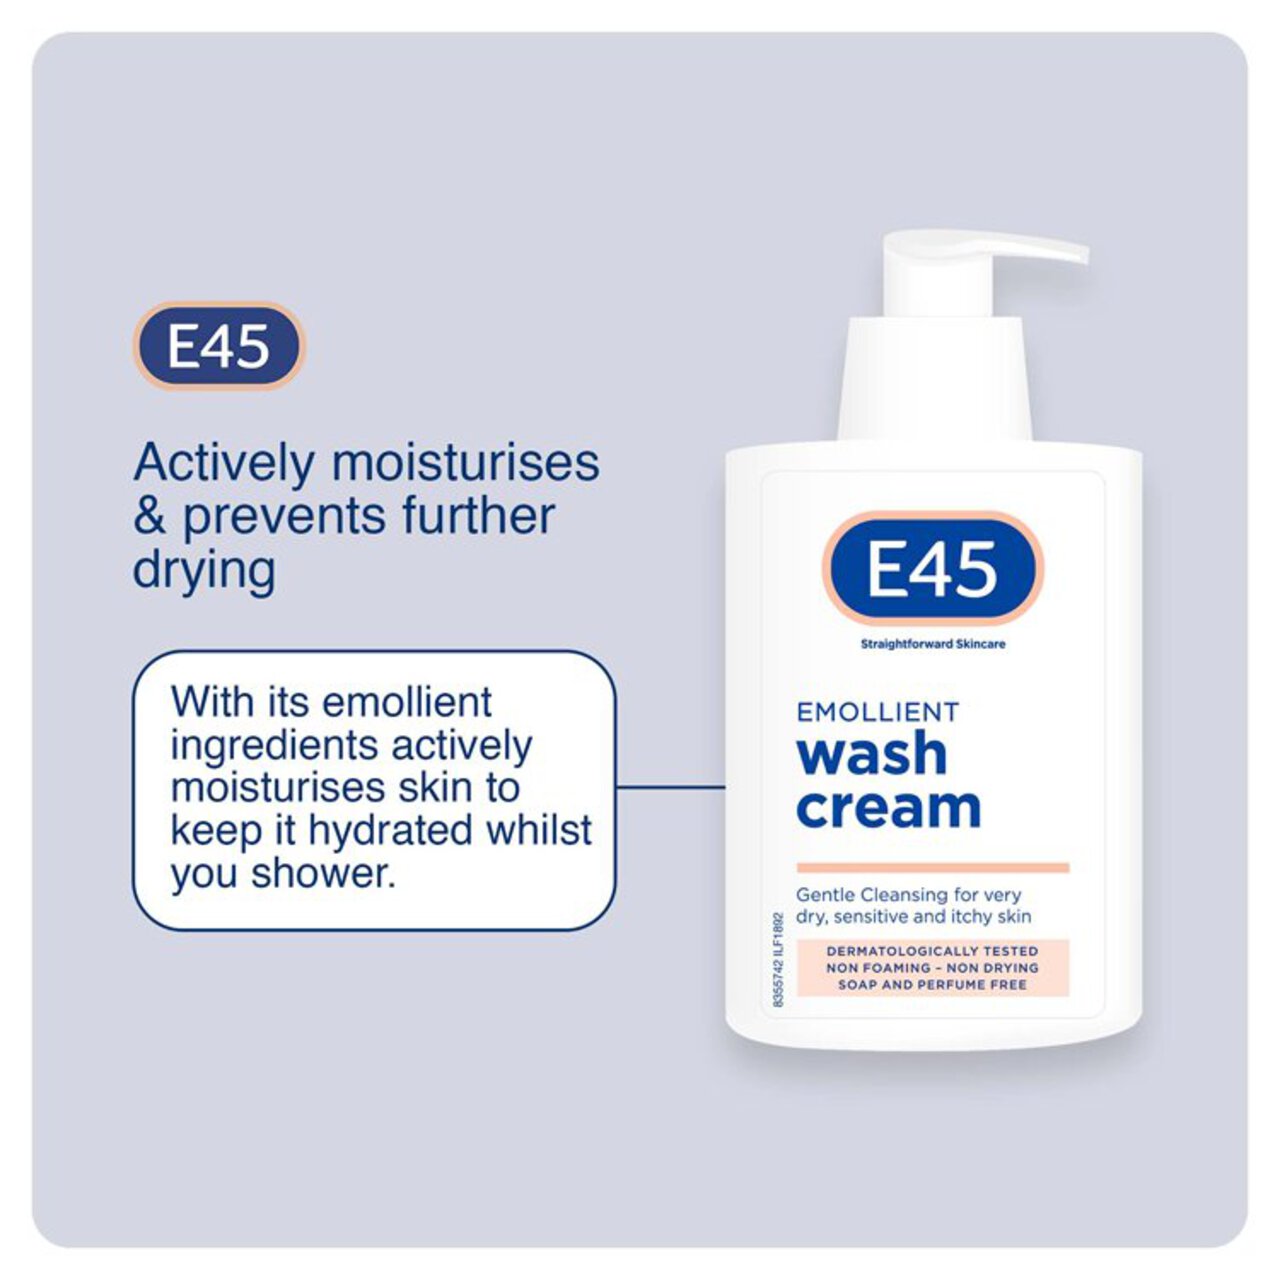 E45 Emollient Wash Cream, gentle cleansing for very dry skin Pump 250ml